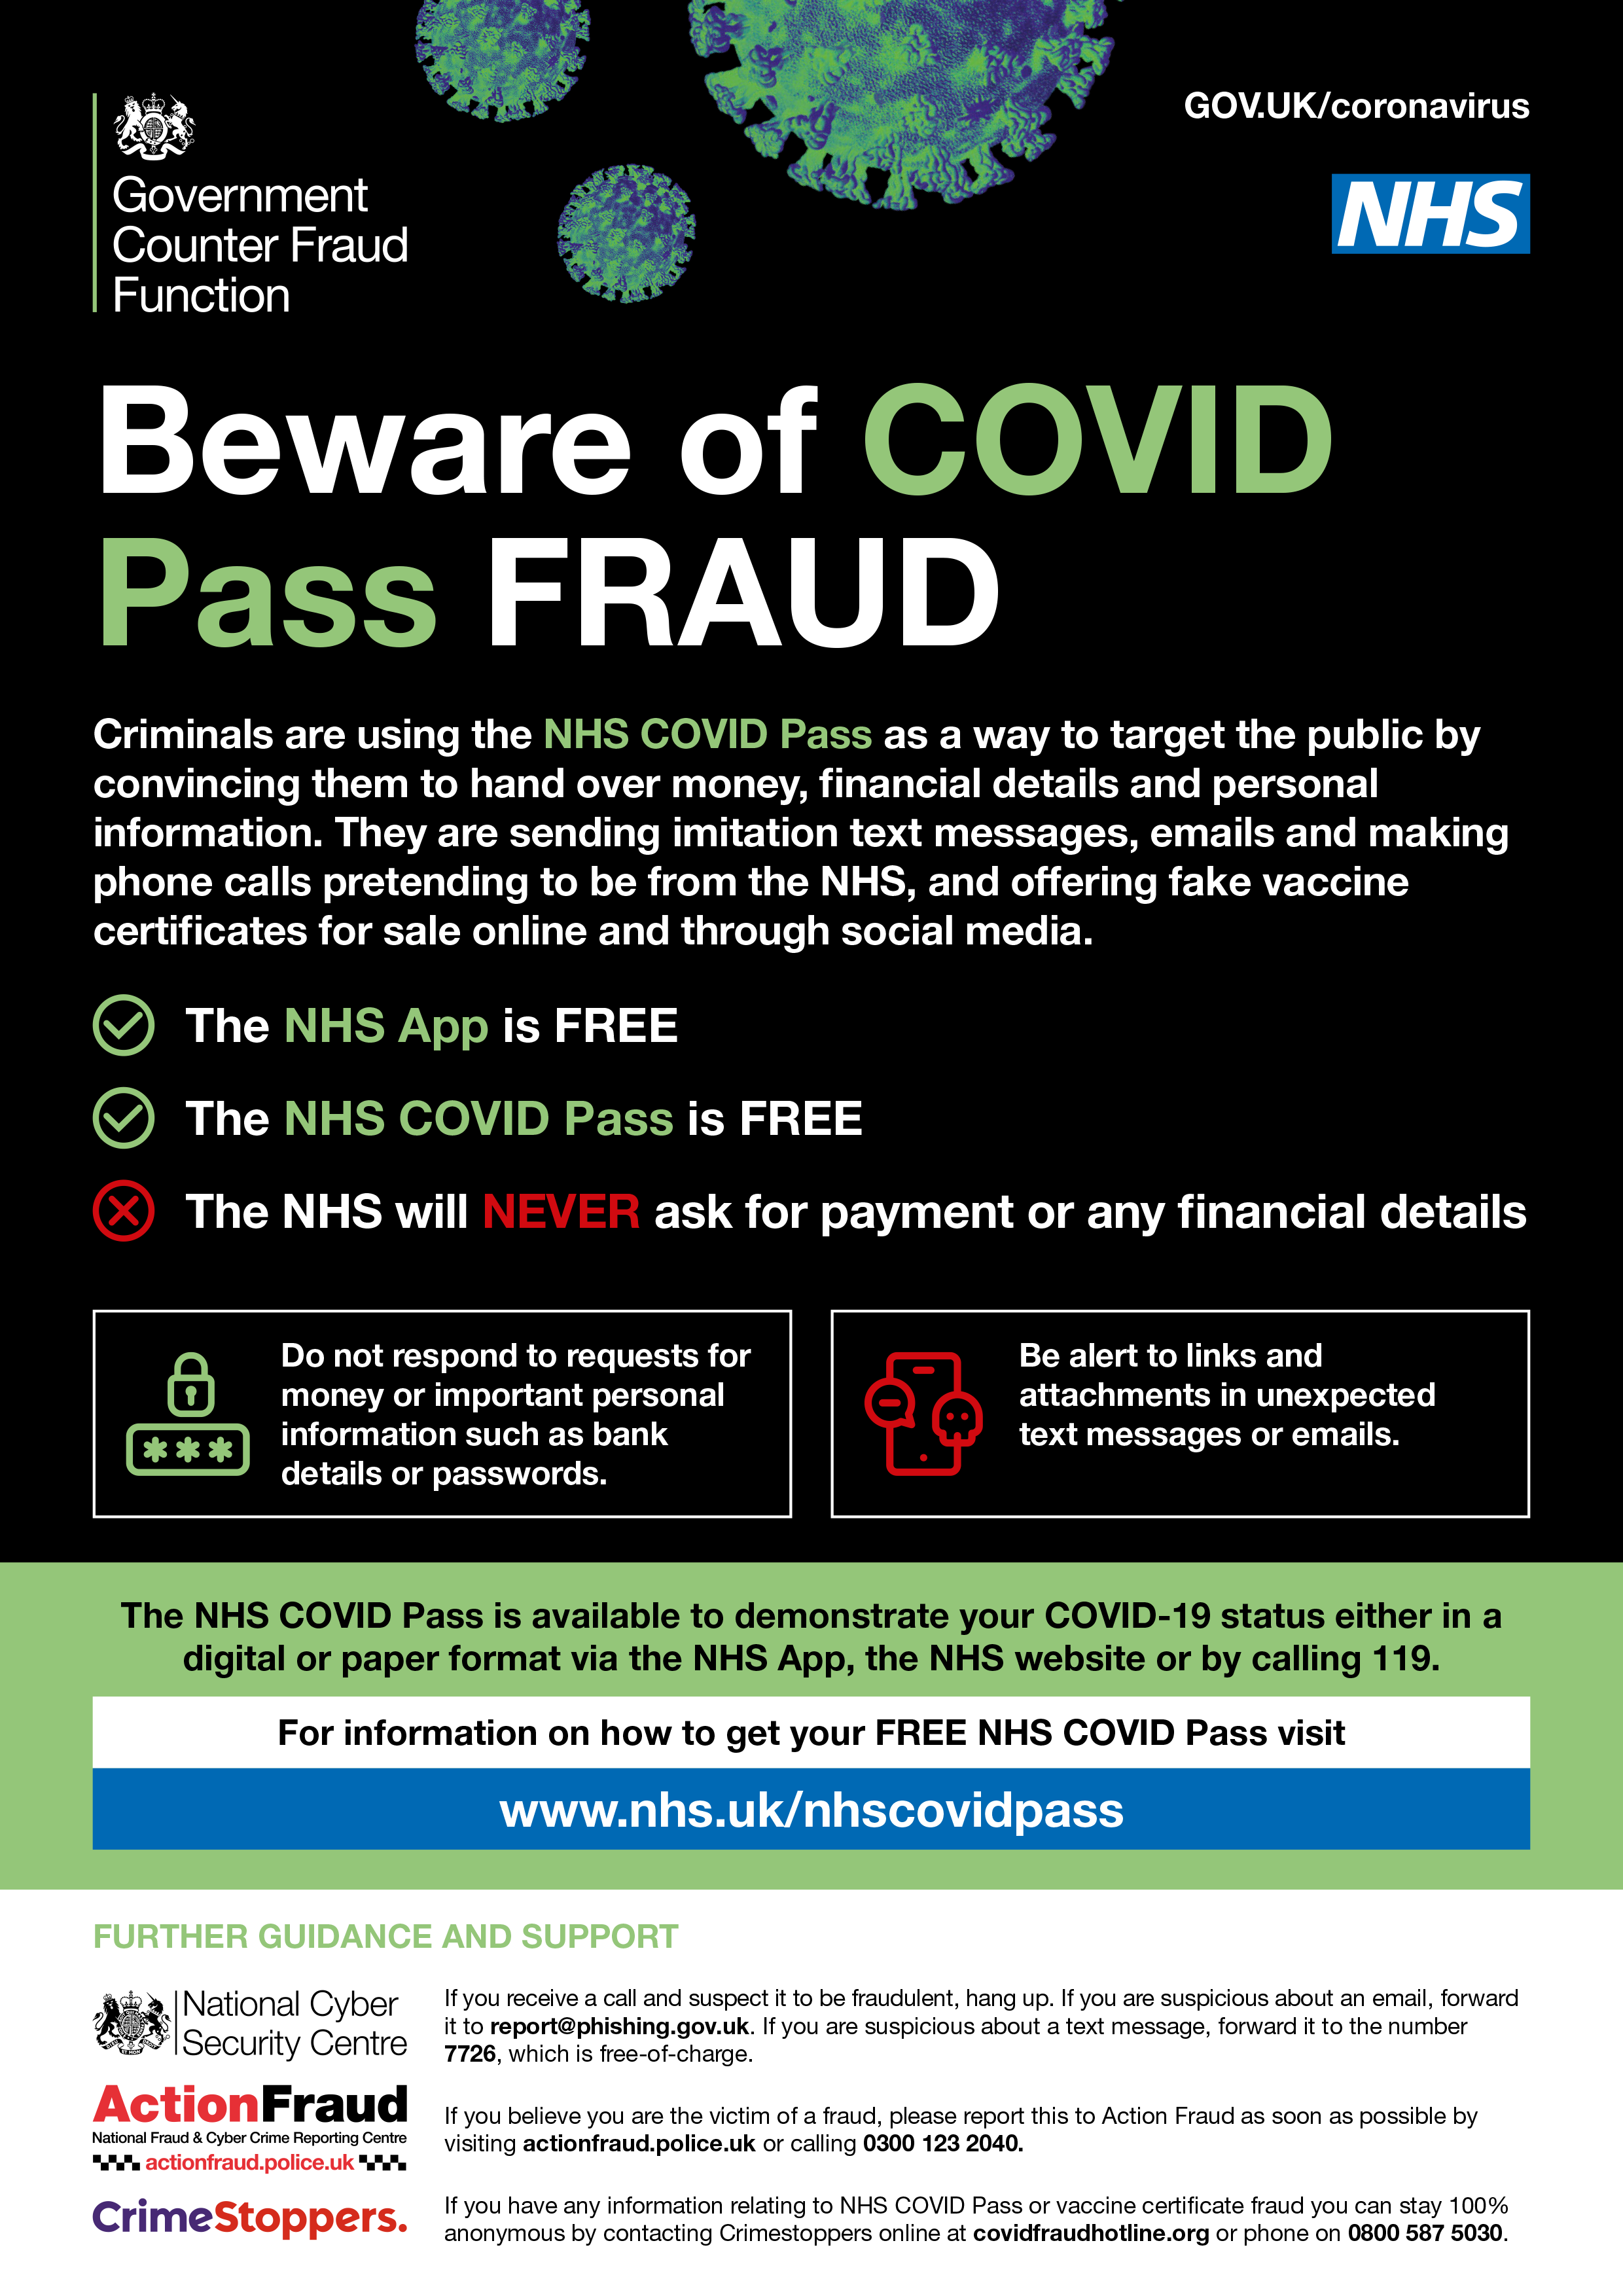 Beware of Covid pass fraud_NHS (PDF link on this page is readable)